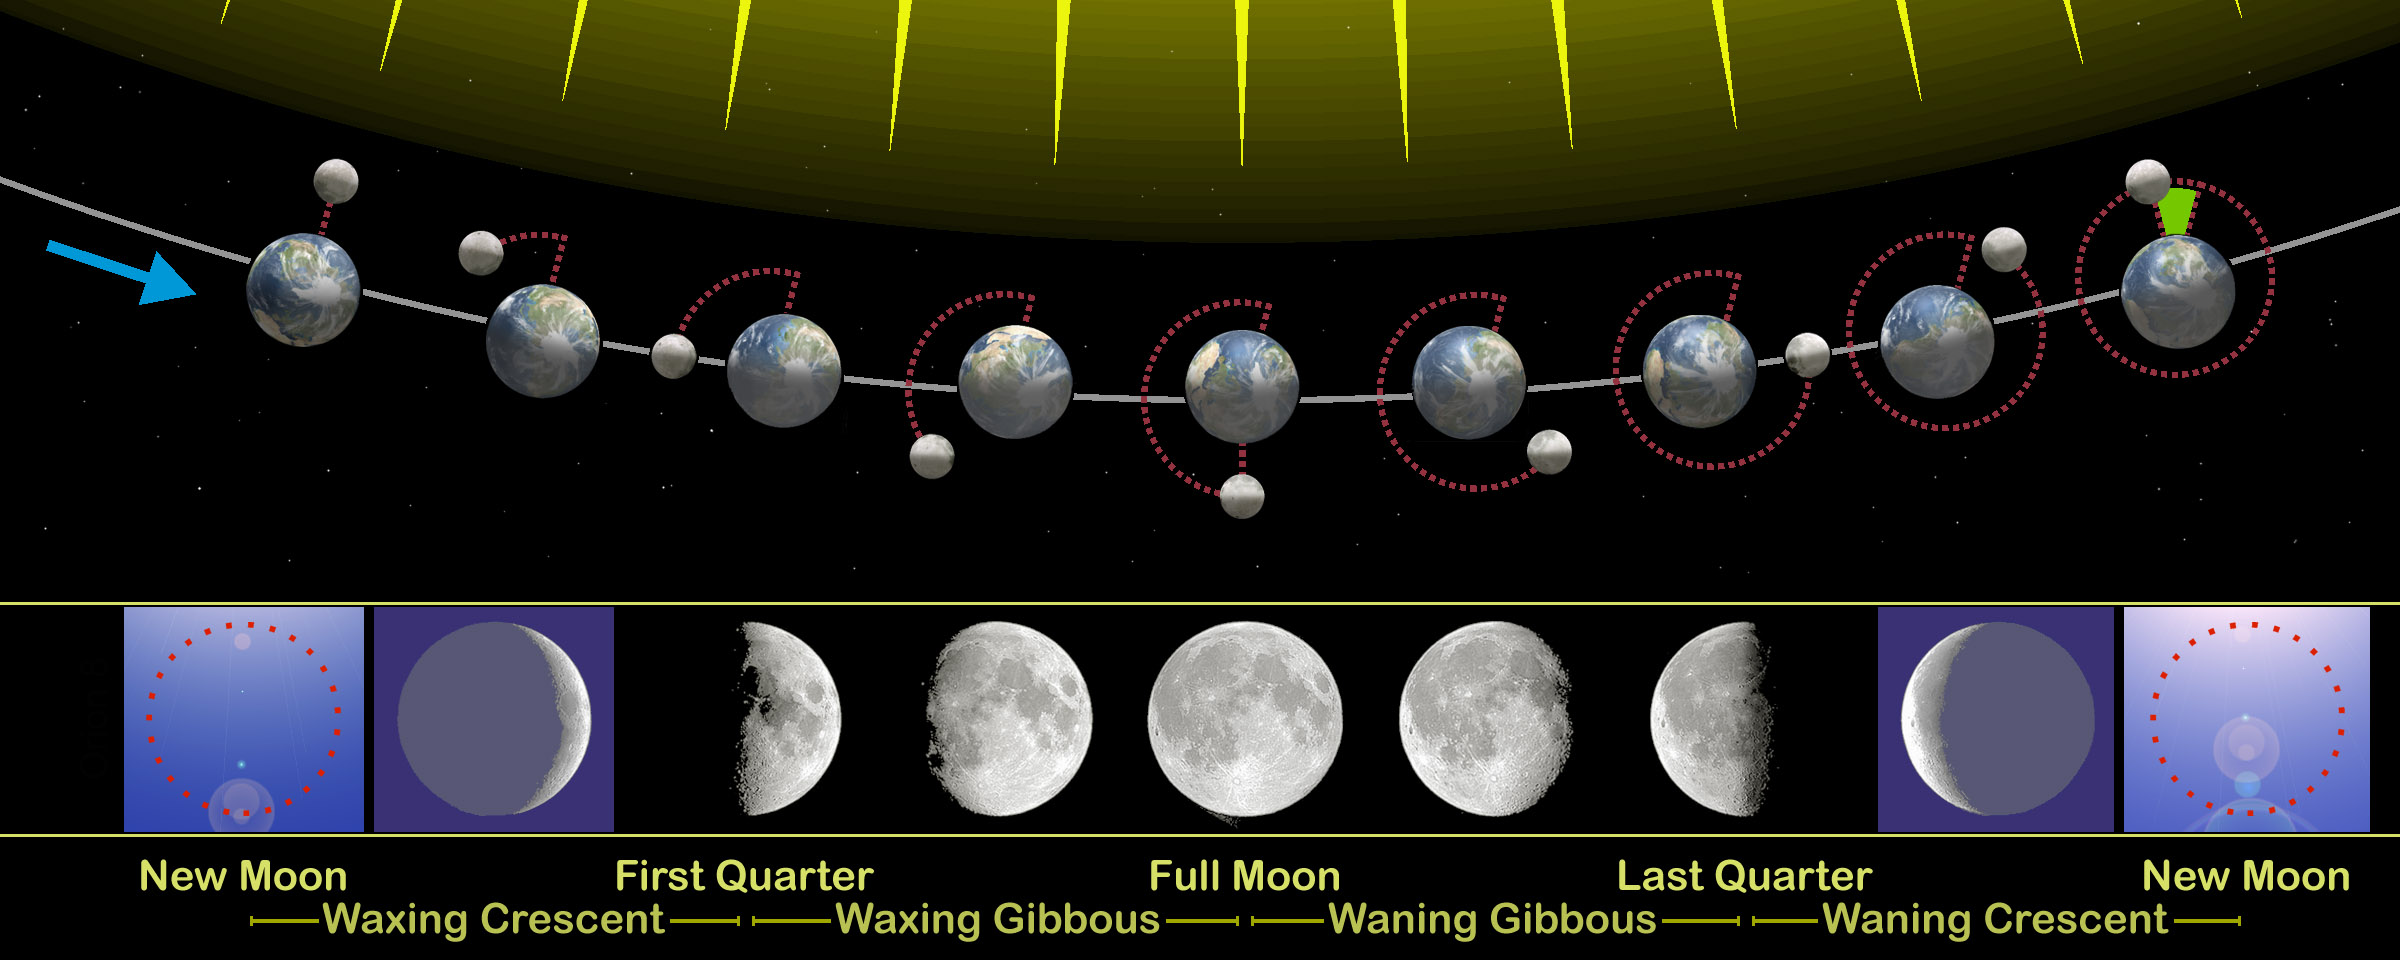 Diagram showing the phases of the moon as it orbits earth over a month, with corresponding views of the moon from earth below.